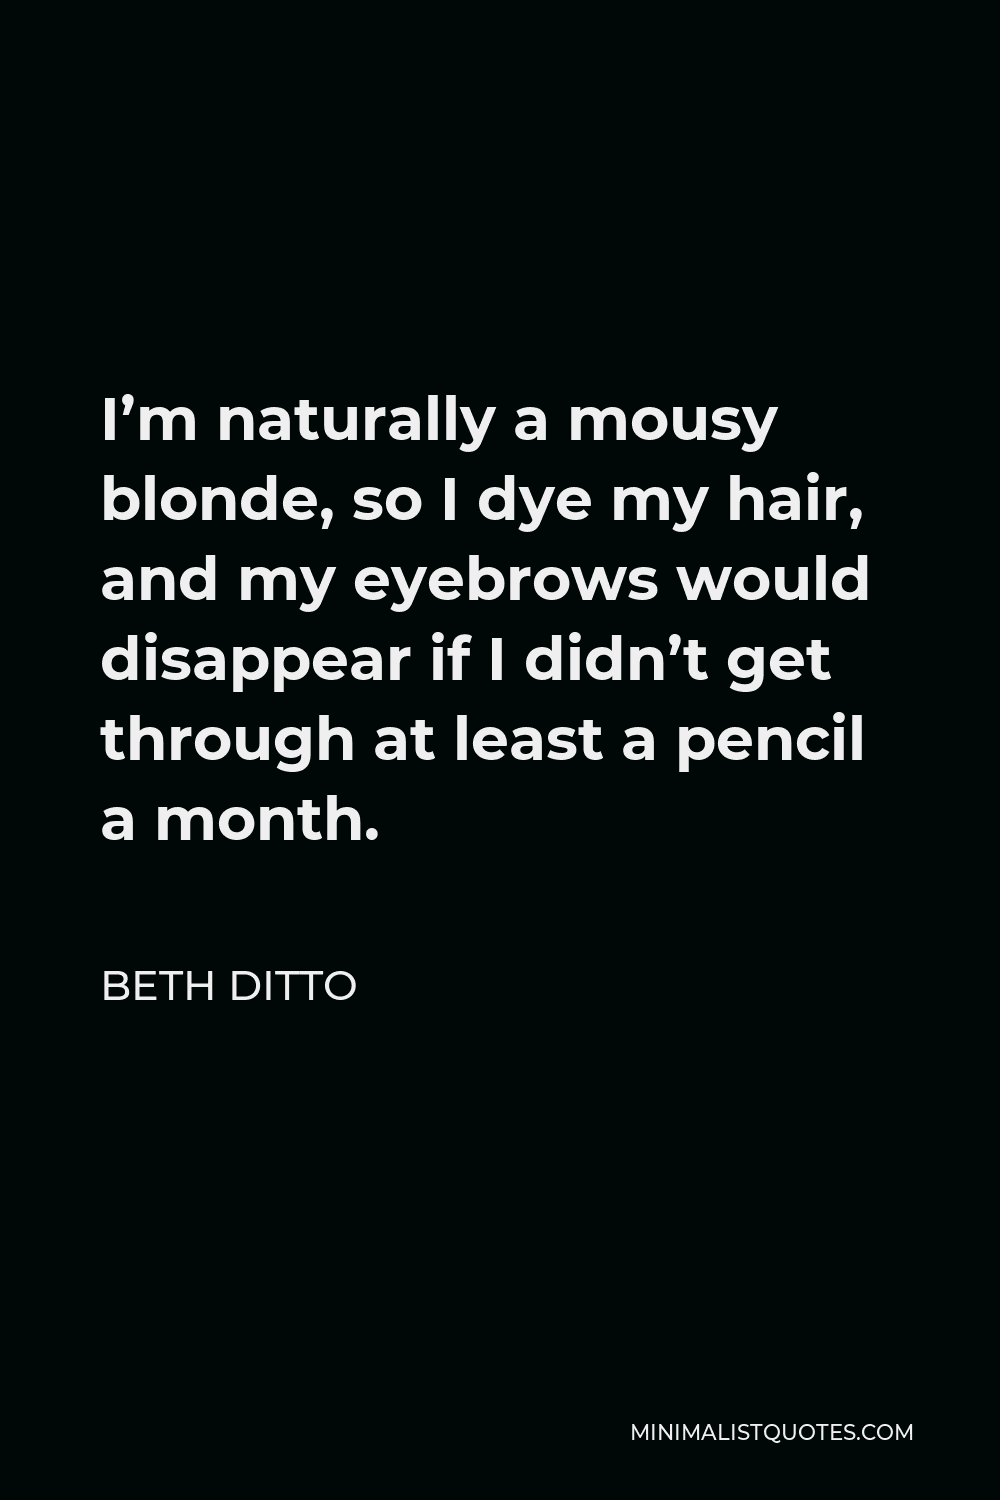 Beth Ditto Quote - I’m naturally a mousy blonde, so I dye my hair, and my eyebrows would disappear if I didn’t get through at least a pencil a month.